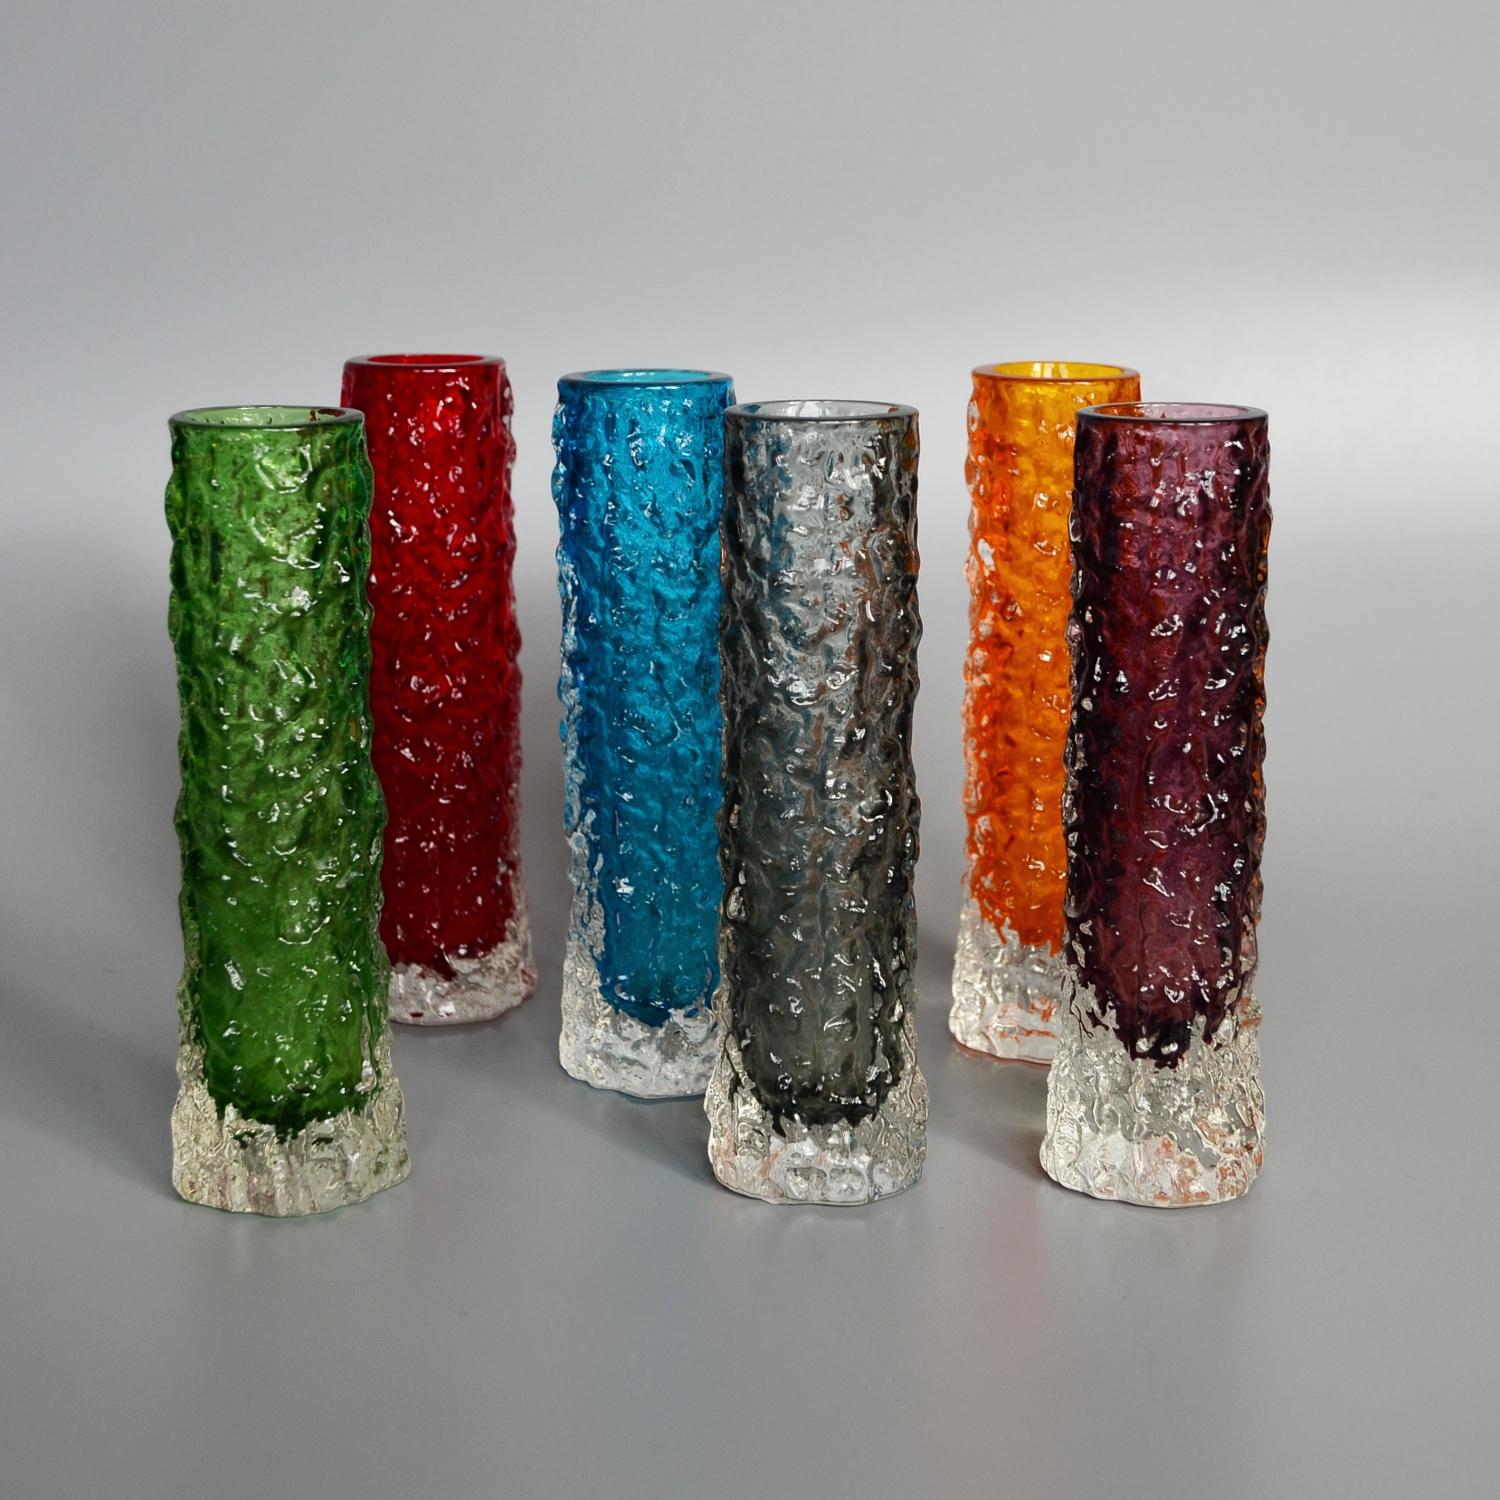 A Collection of six textured 'Finger' Bark Vases in various colors designed by Geoffrey Baxter for Whitefriars Glass Factory. 

Designer: Geoffrey Baxter (1922-1995)

Geoffrey Baxter was one of the most influential and significant British glass